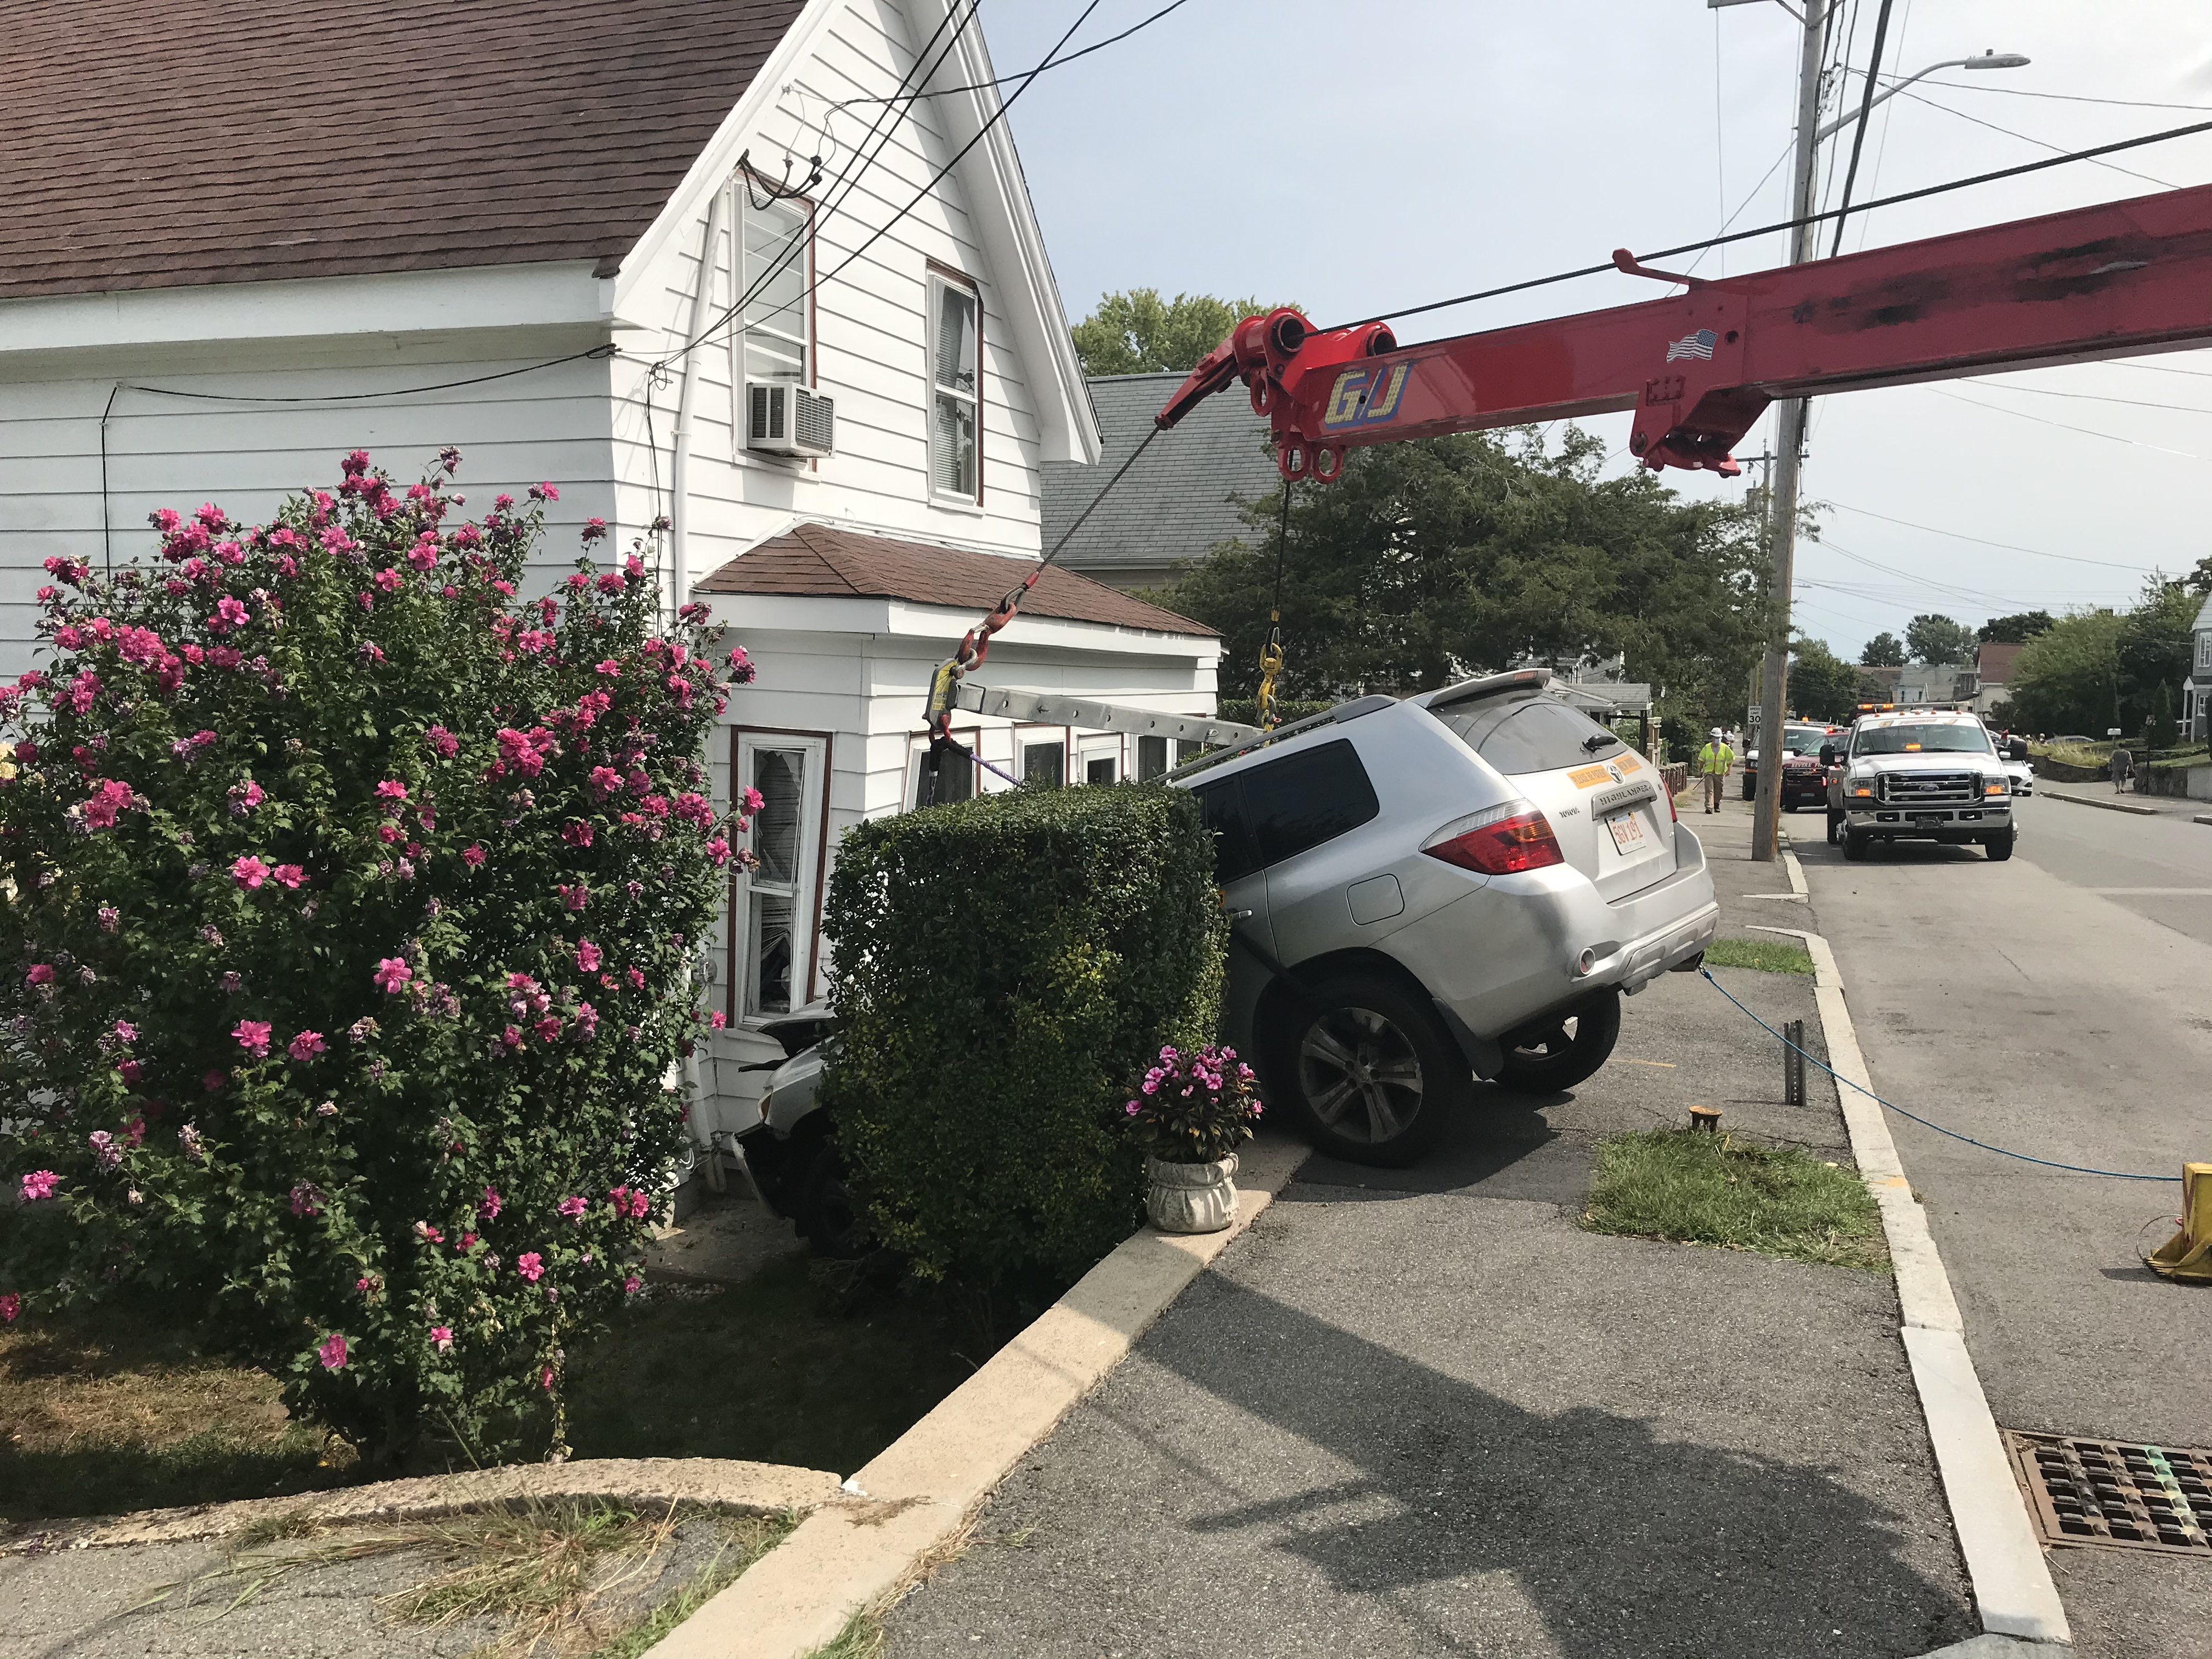 Rfd Press Release Motor Vehicle Crashes Into Home - City Of Revere Massachusetts